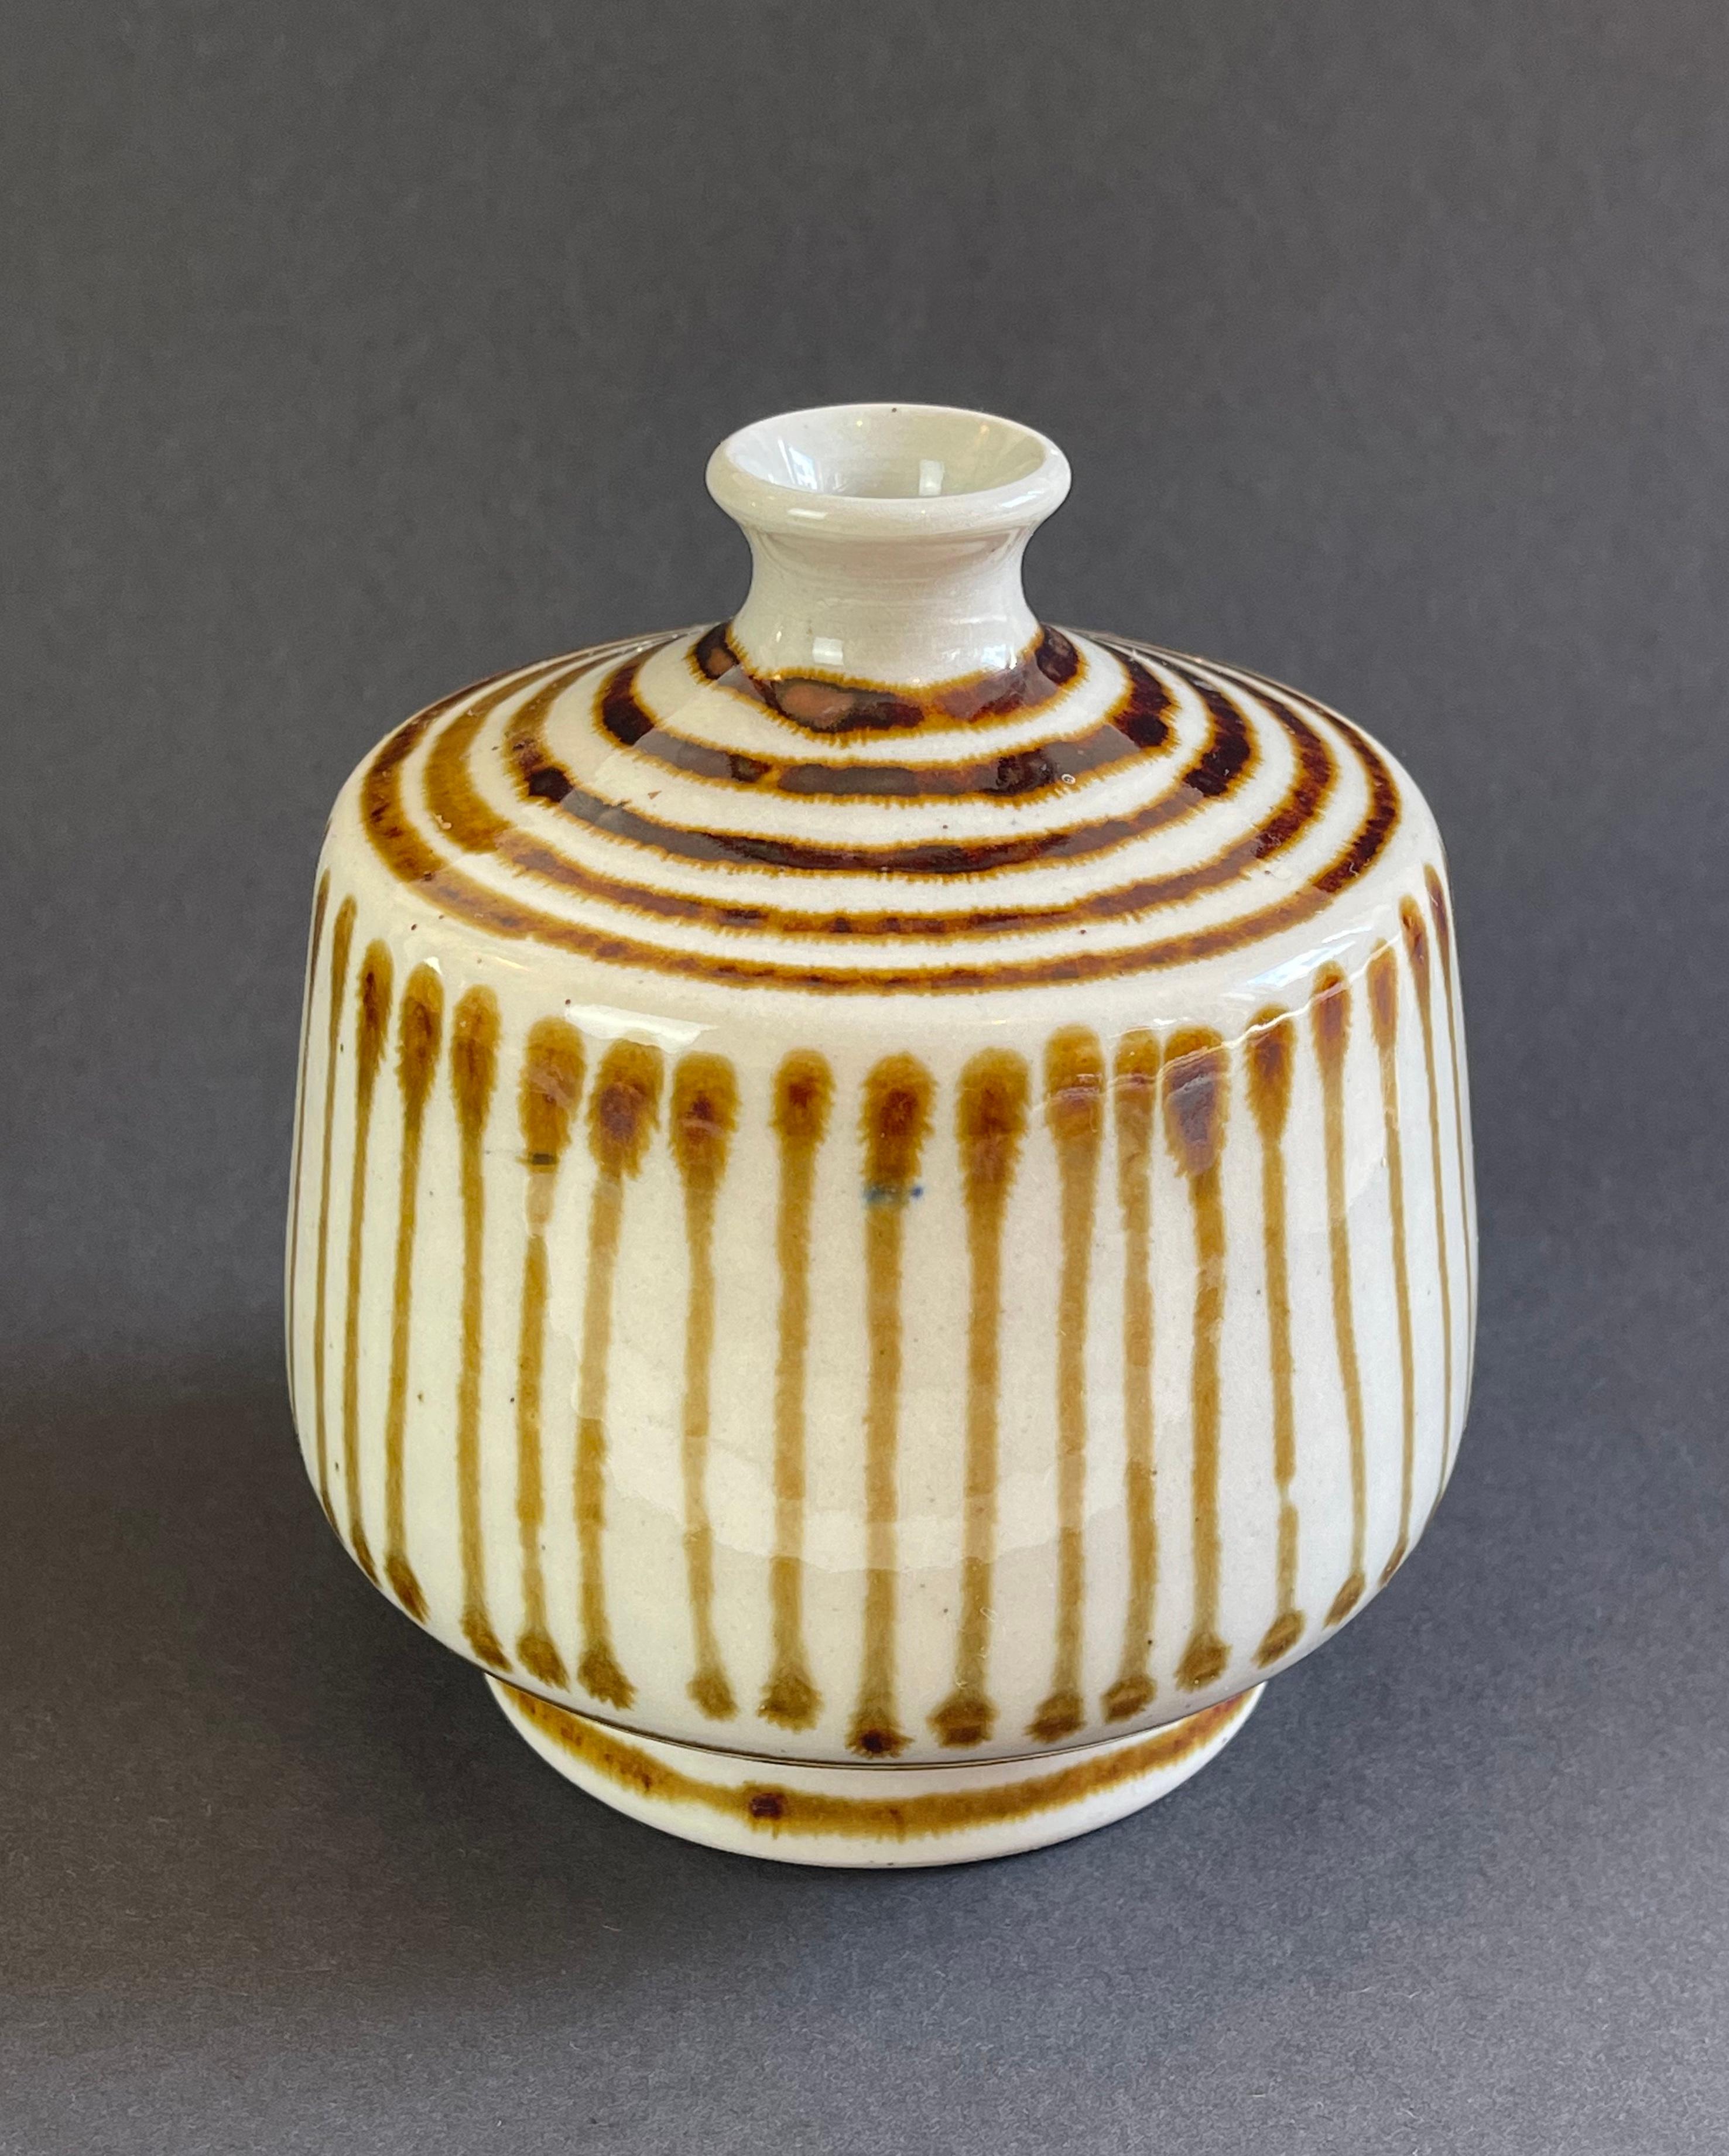 Of possibly Danish origin is this vase, hand made & hand painted ceramic vase.
Beautiful caramel coloured stripes on the natural beige base material.
Also with a hint of Japanese style, this piece is a unique find.
Signed ''W'' & ''21''.